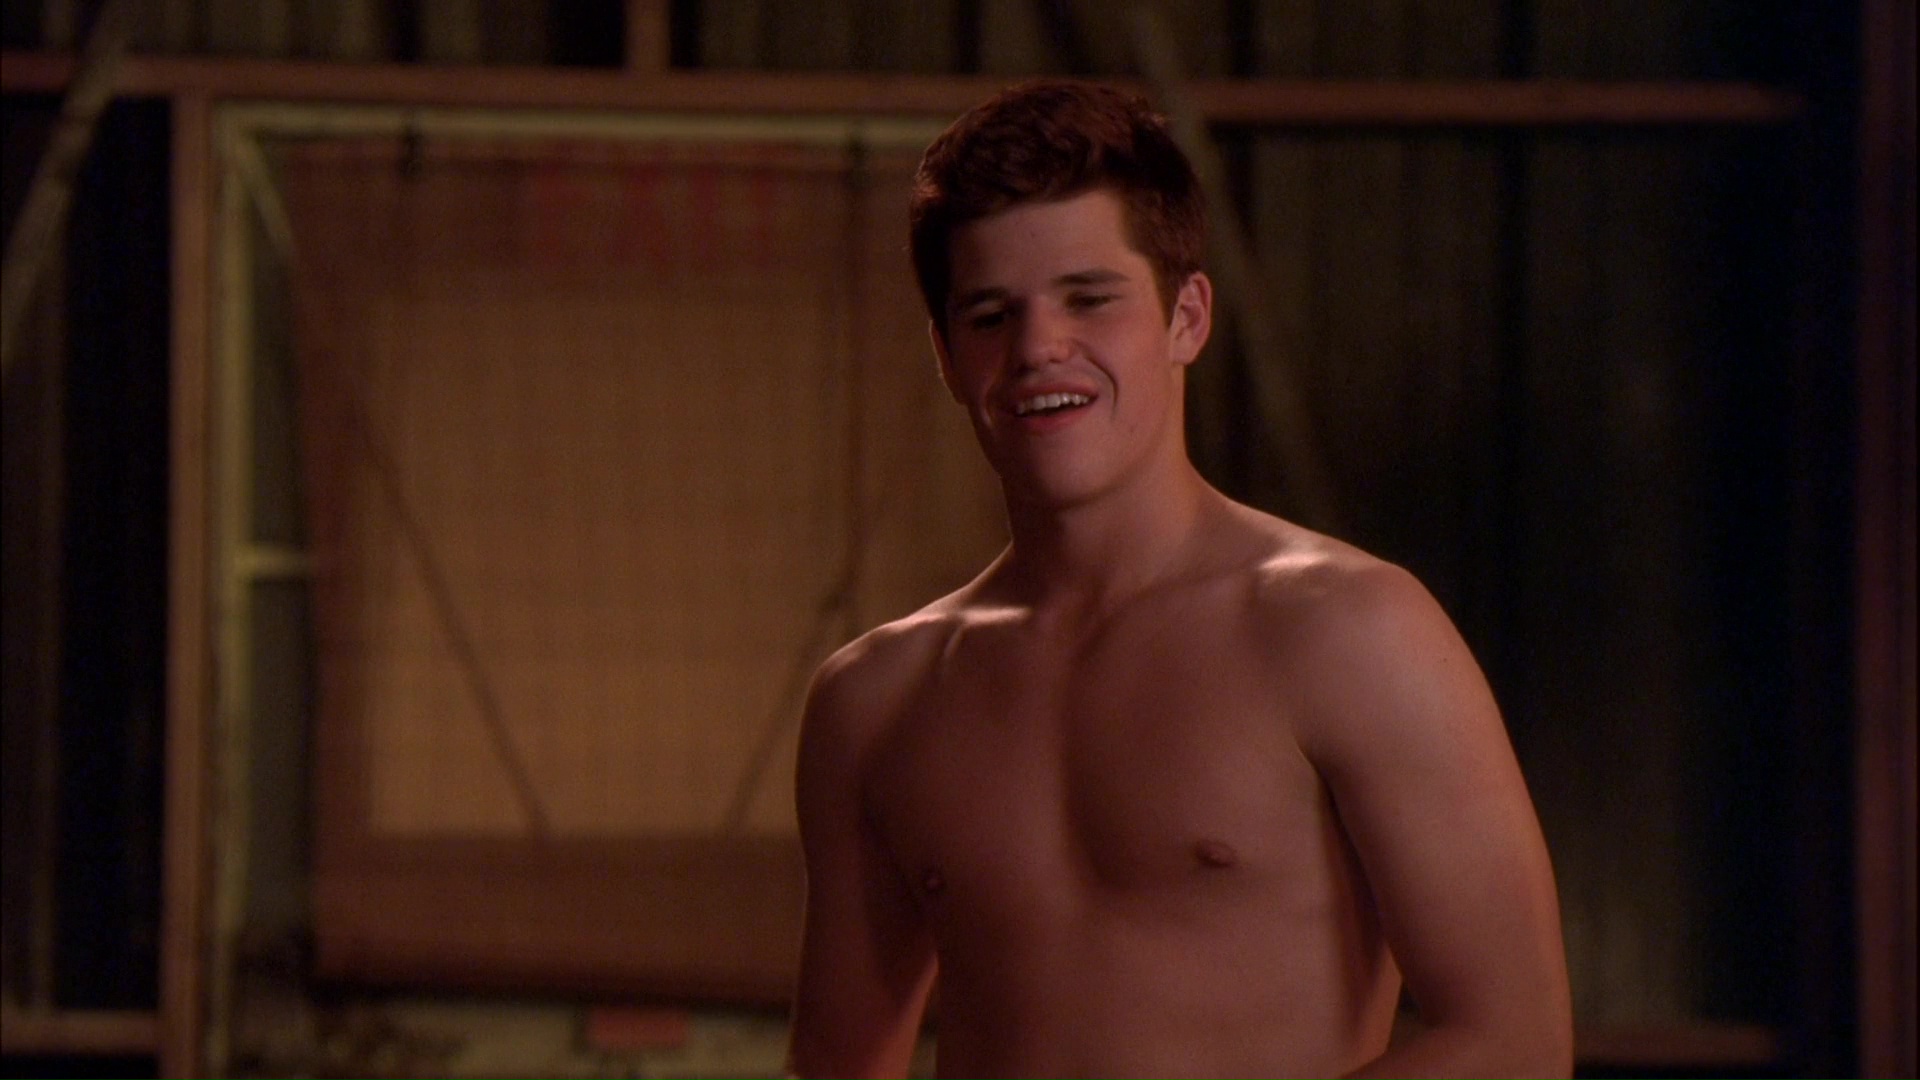 Charlie Carver shirtless in Desperate Housewives 5-06 "There's Al...